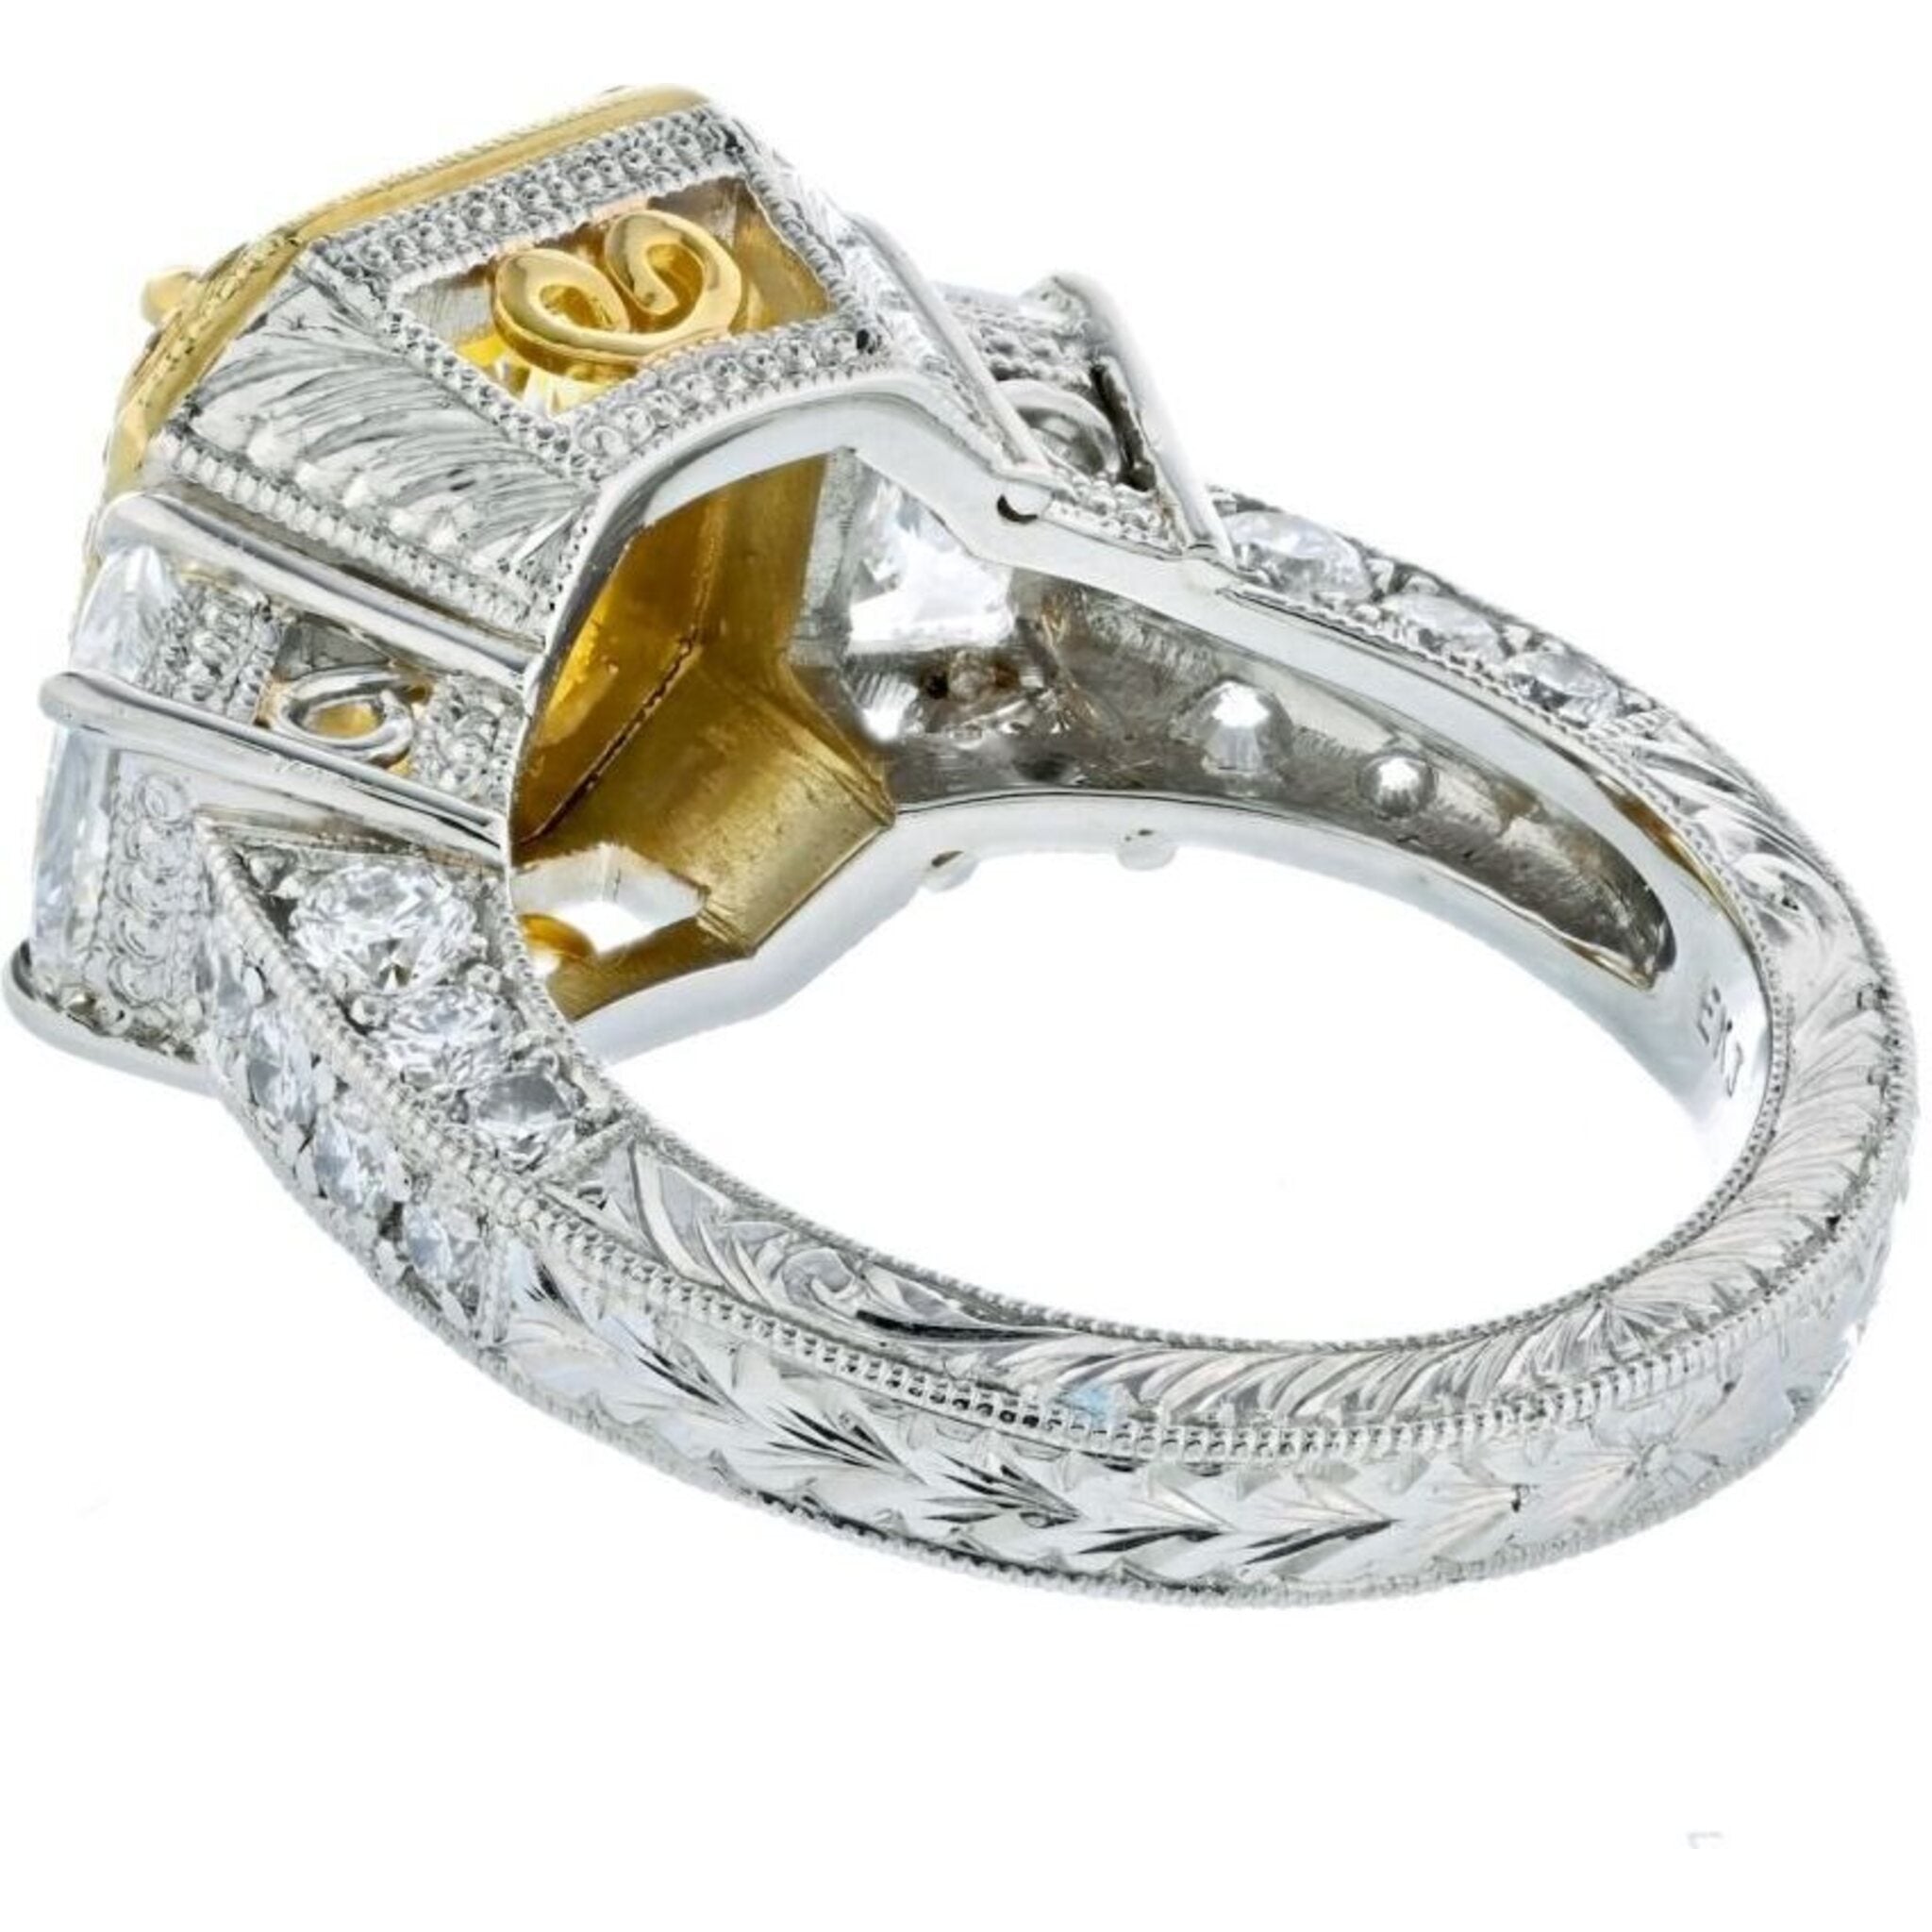 Art Deco Diamond Rings: Elegant Jewelry for Special Events  